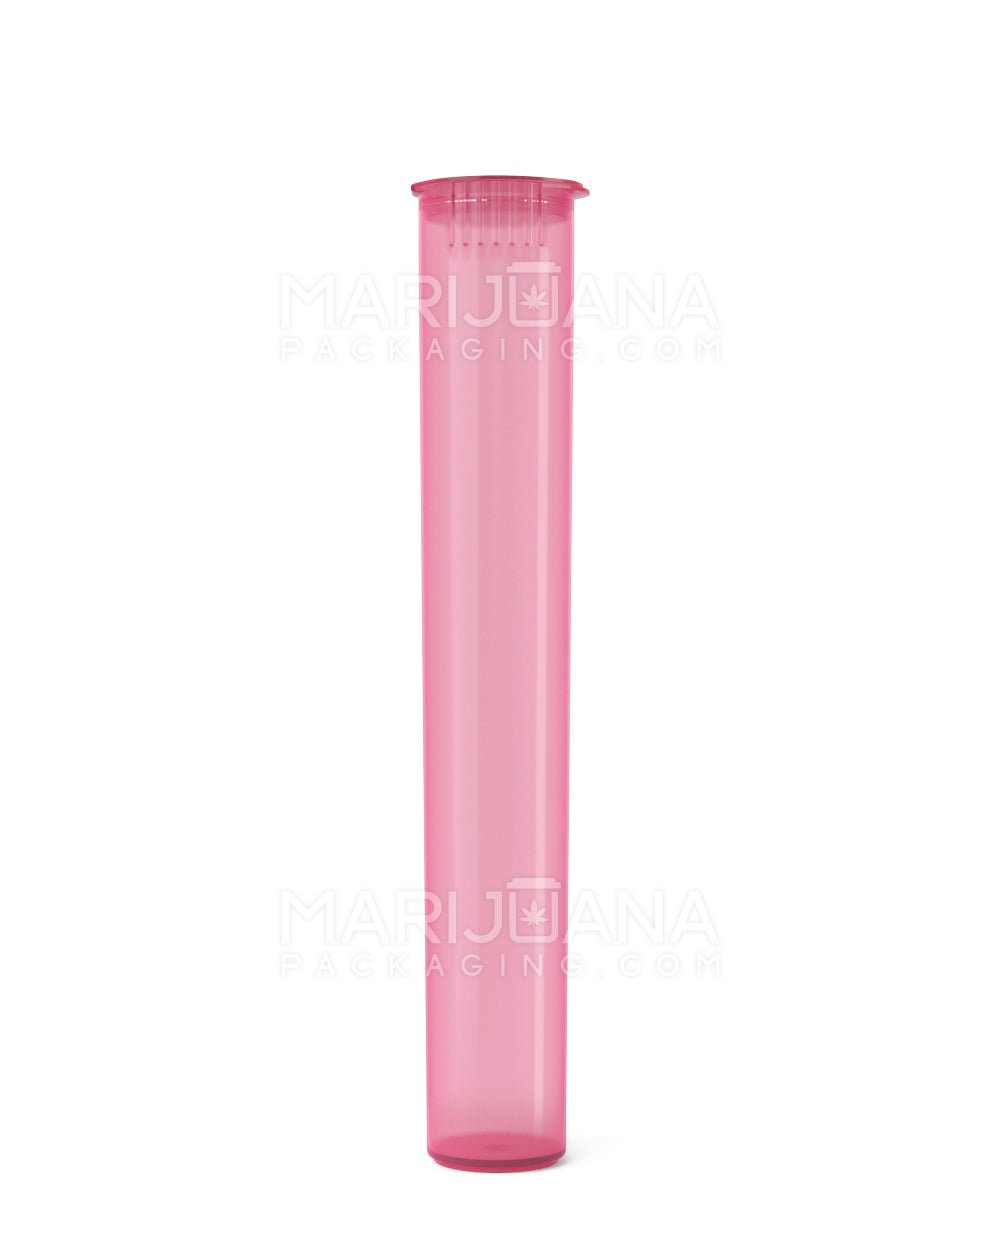 Child Resistant | King Size Pop Top Translucent Plastic Pre-Roll Tubes | 116mm - Pink- 1000 Count - 2